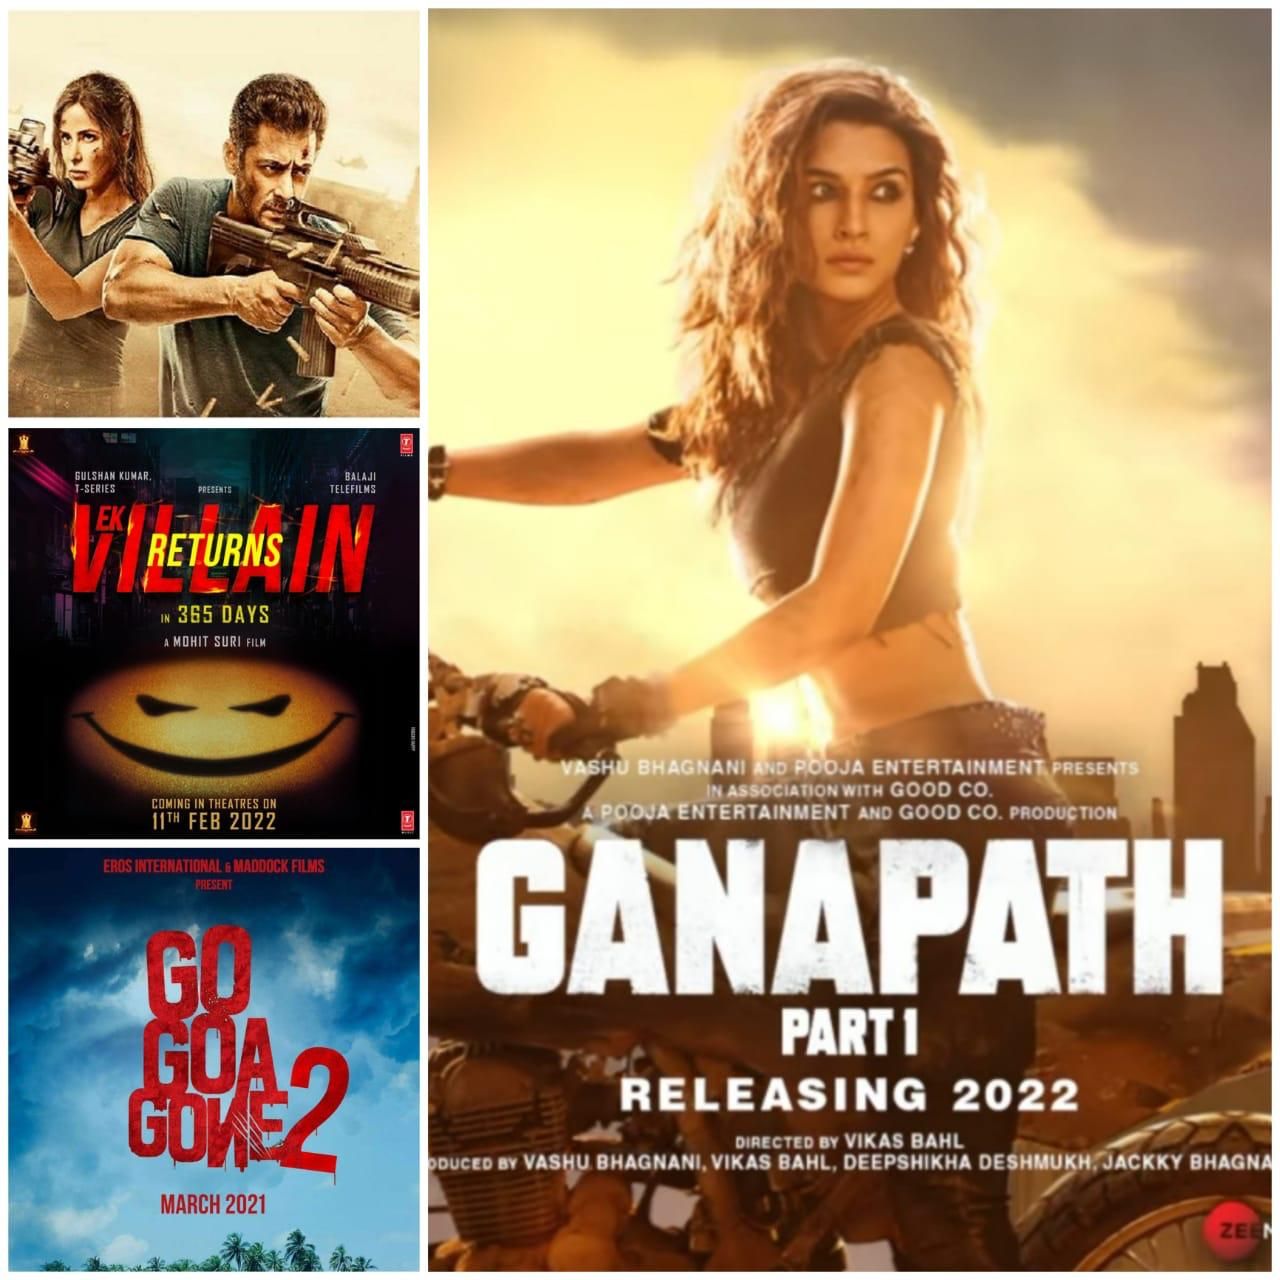 Ganapath, Tiger 3 And Other Exciting Films That Go On Floors This Year